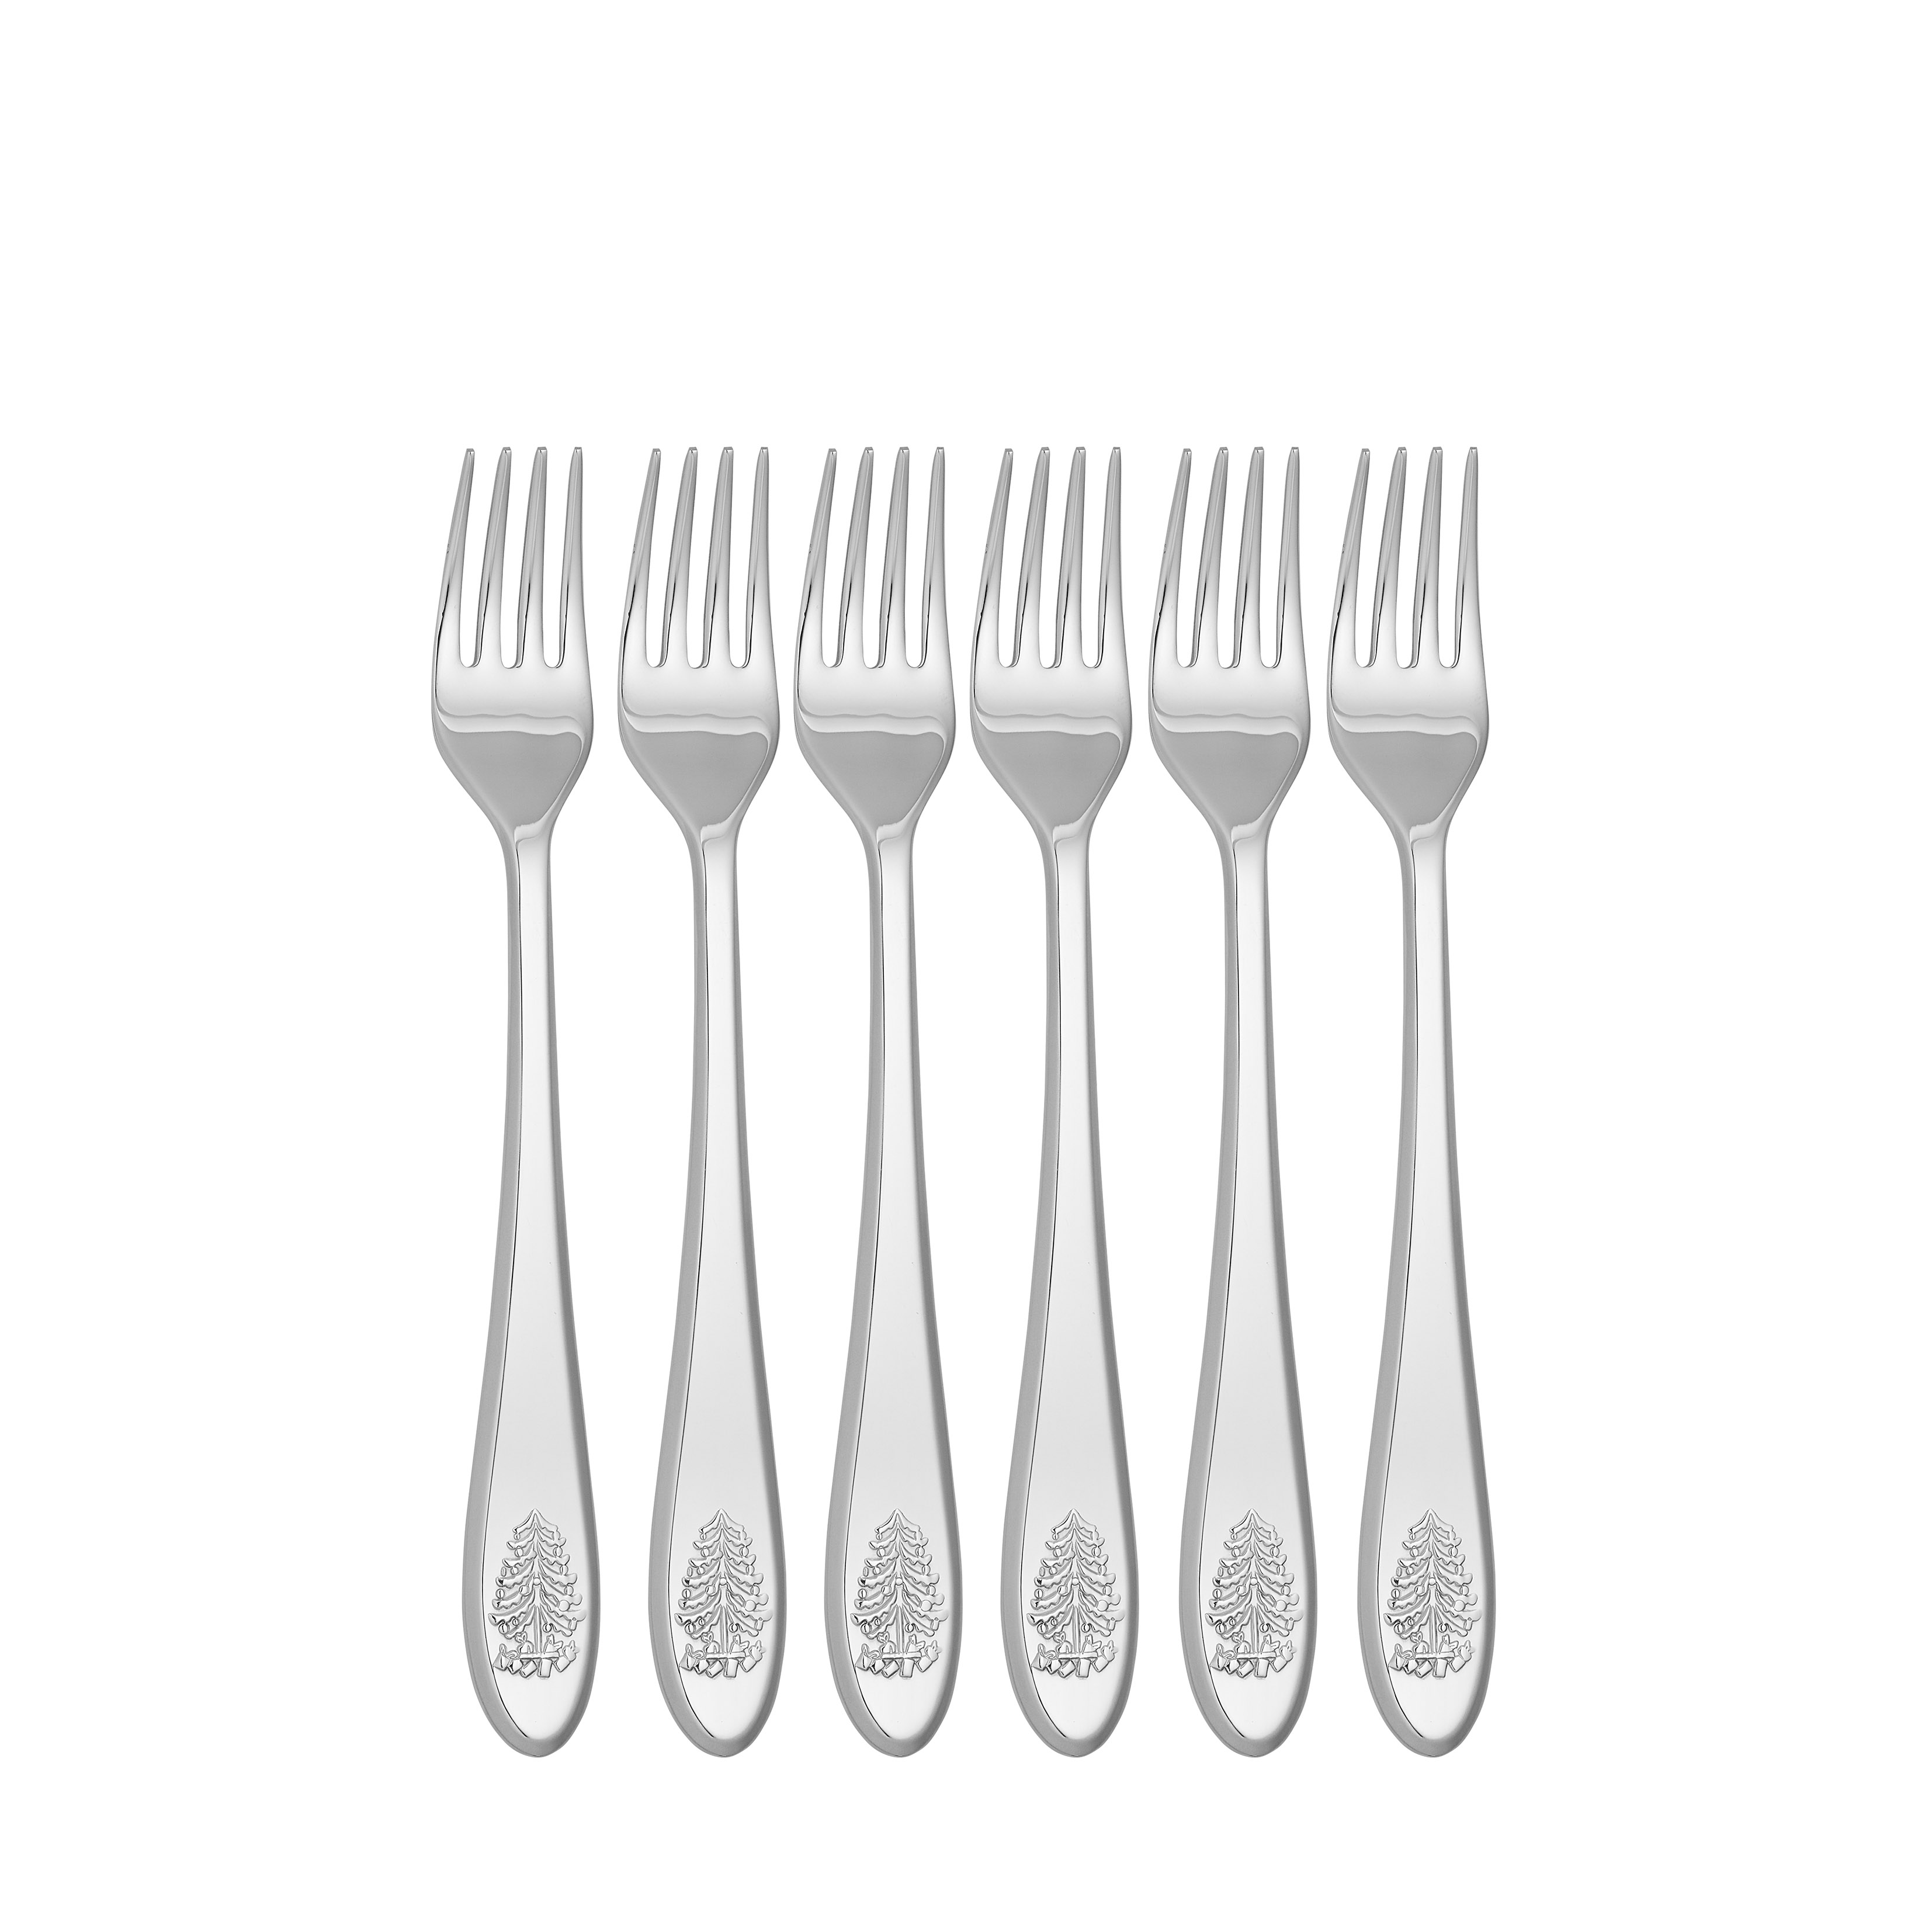 Christmas Tree Cocktail Forks Set of 6 image number null